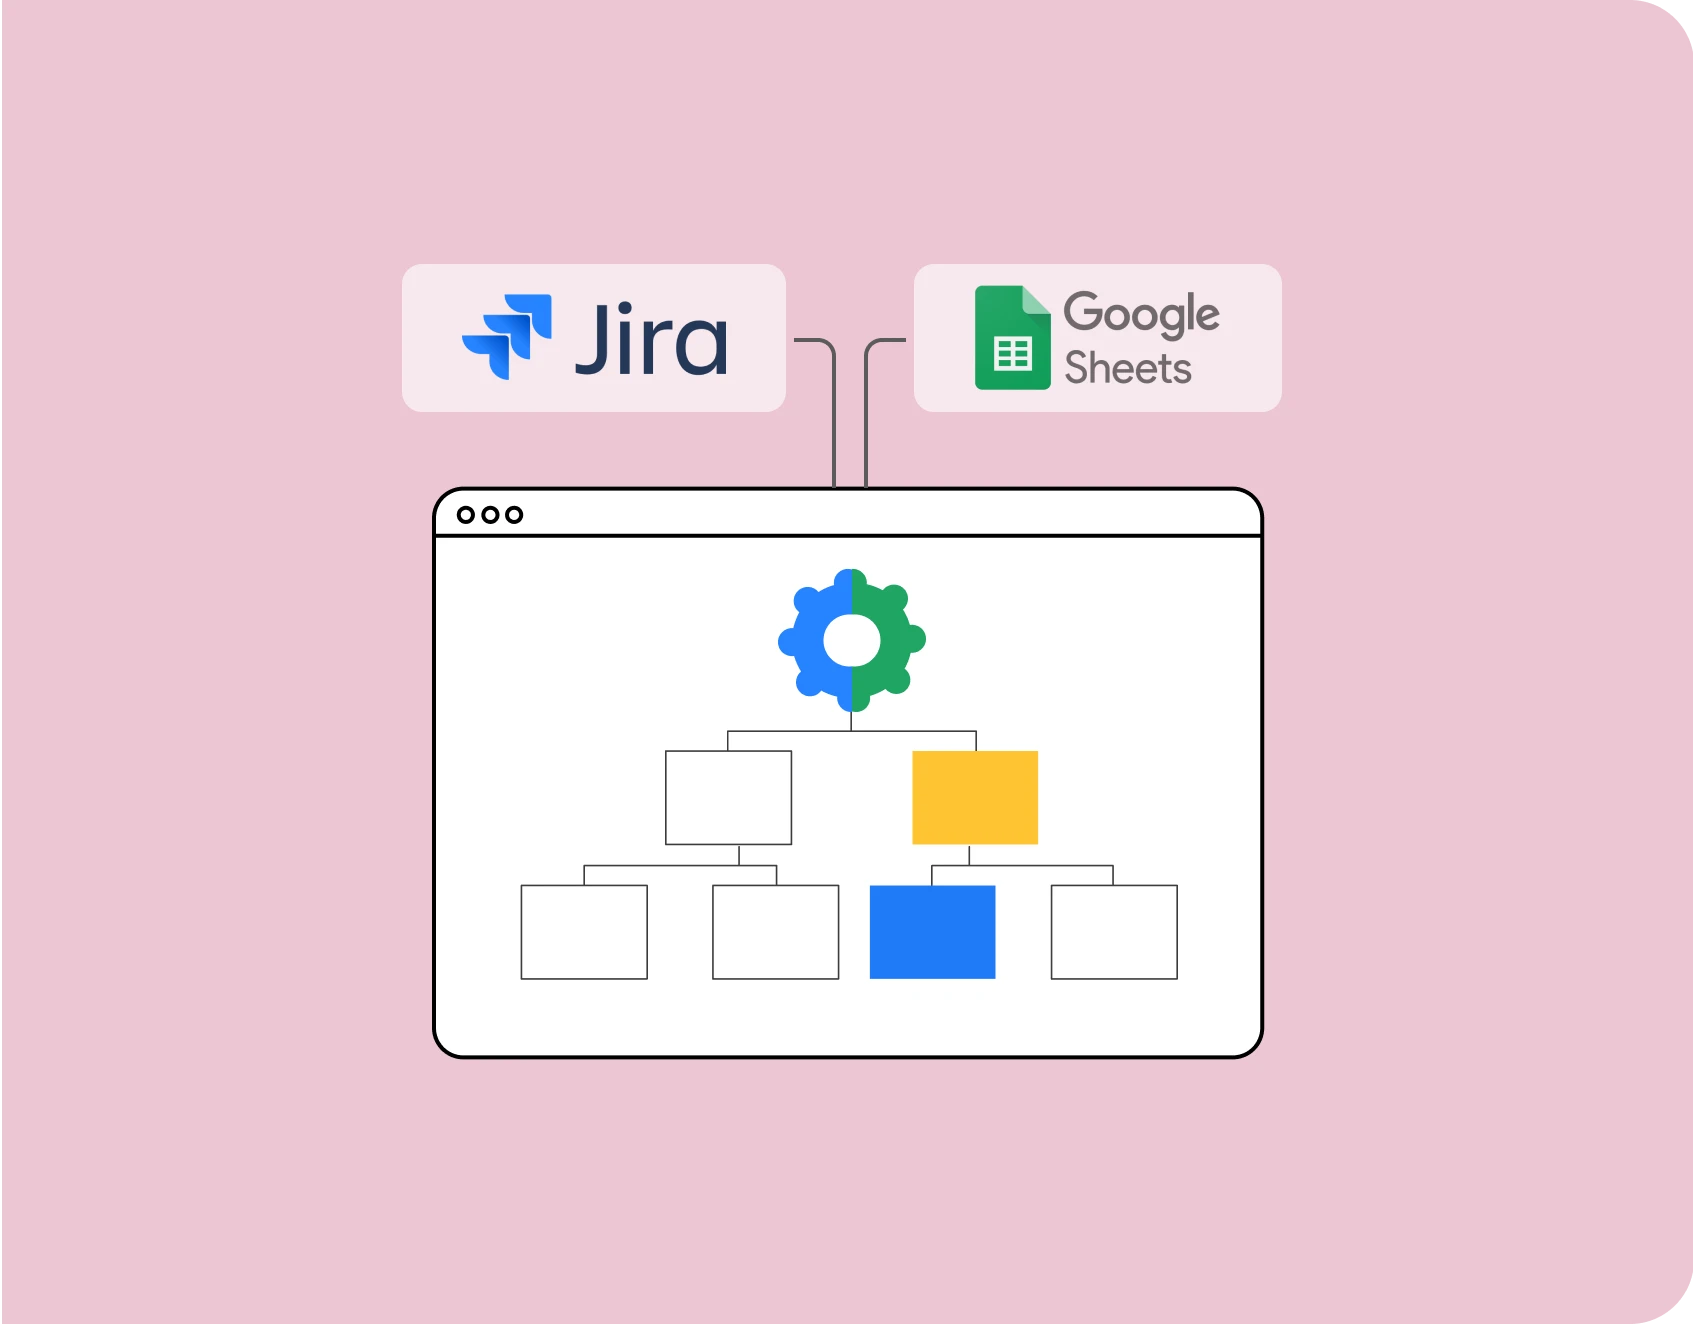 Streamlining Project status report with Jira, Google Sheets